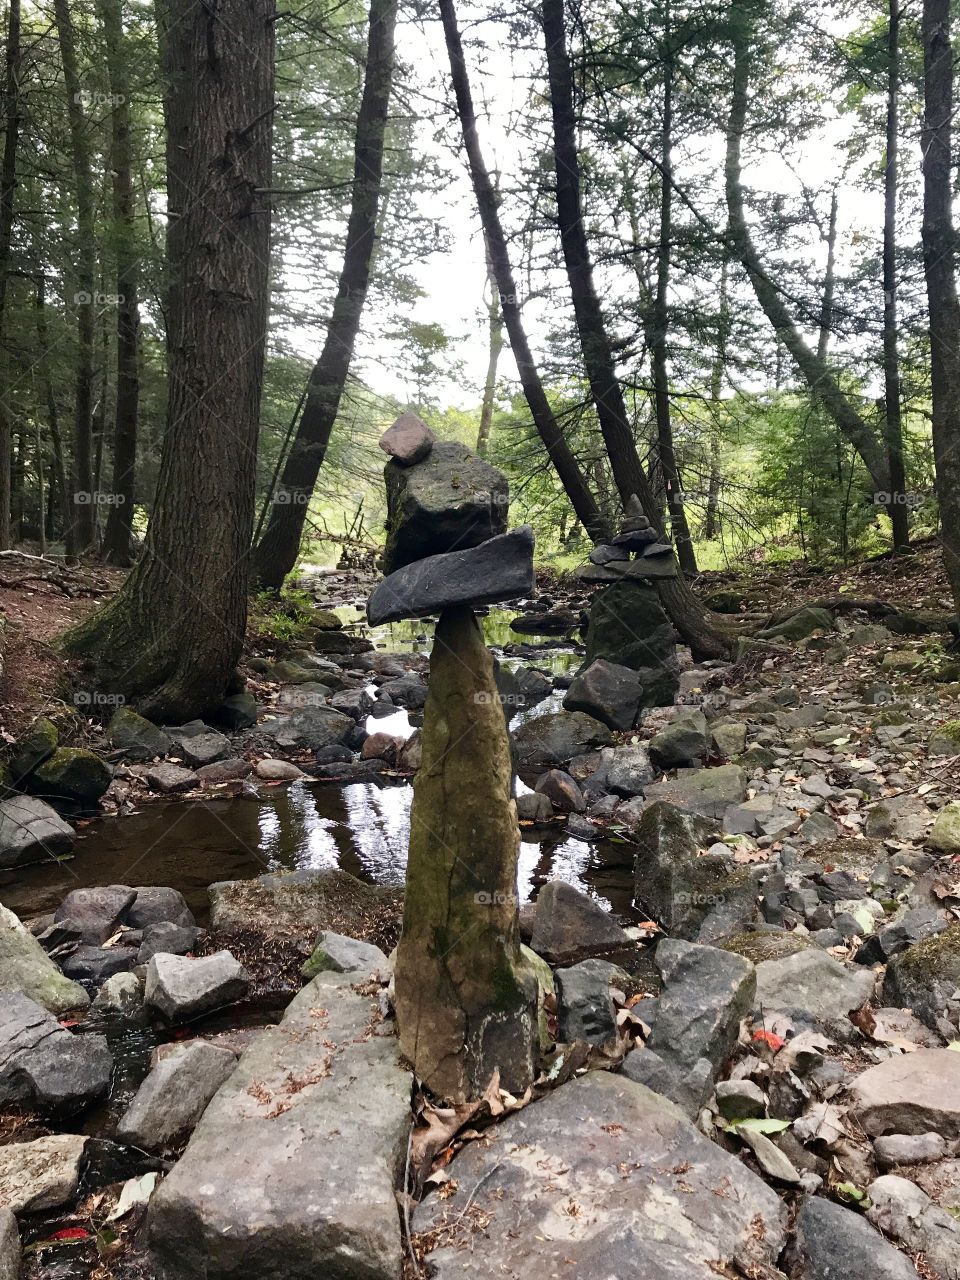 Balance in Nature